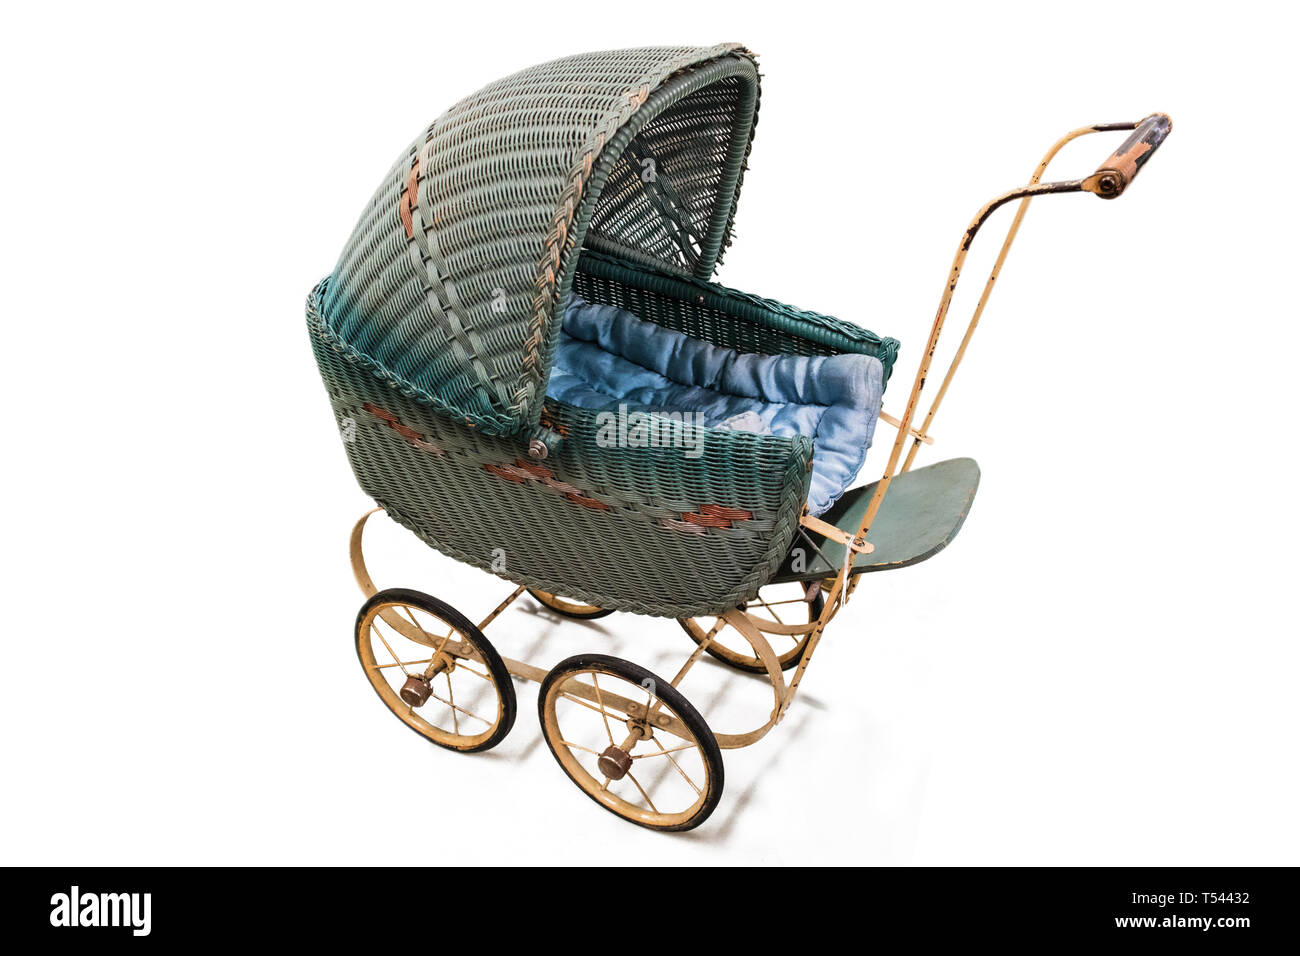 An antique wicker stroller with spoked wheels. Isolated and copy space. Stock Photo